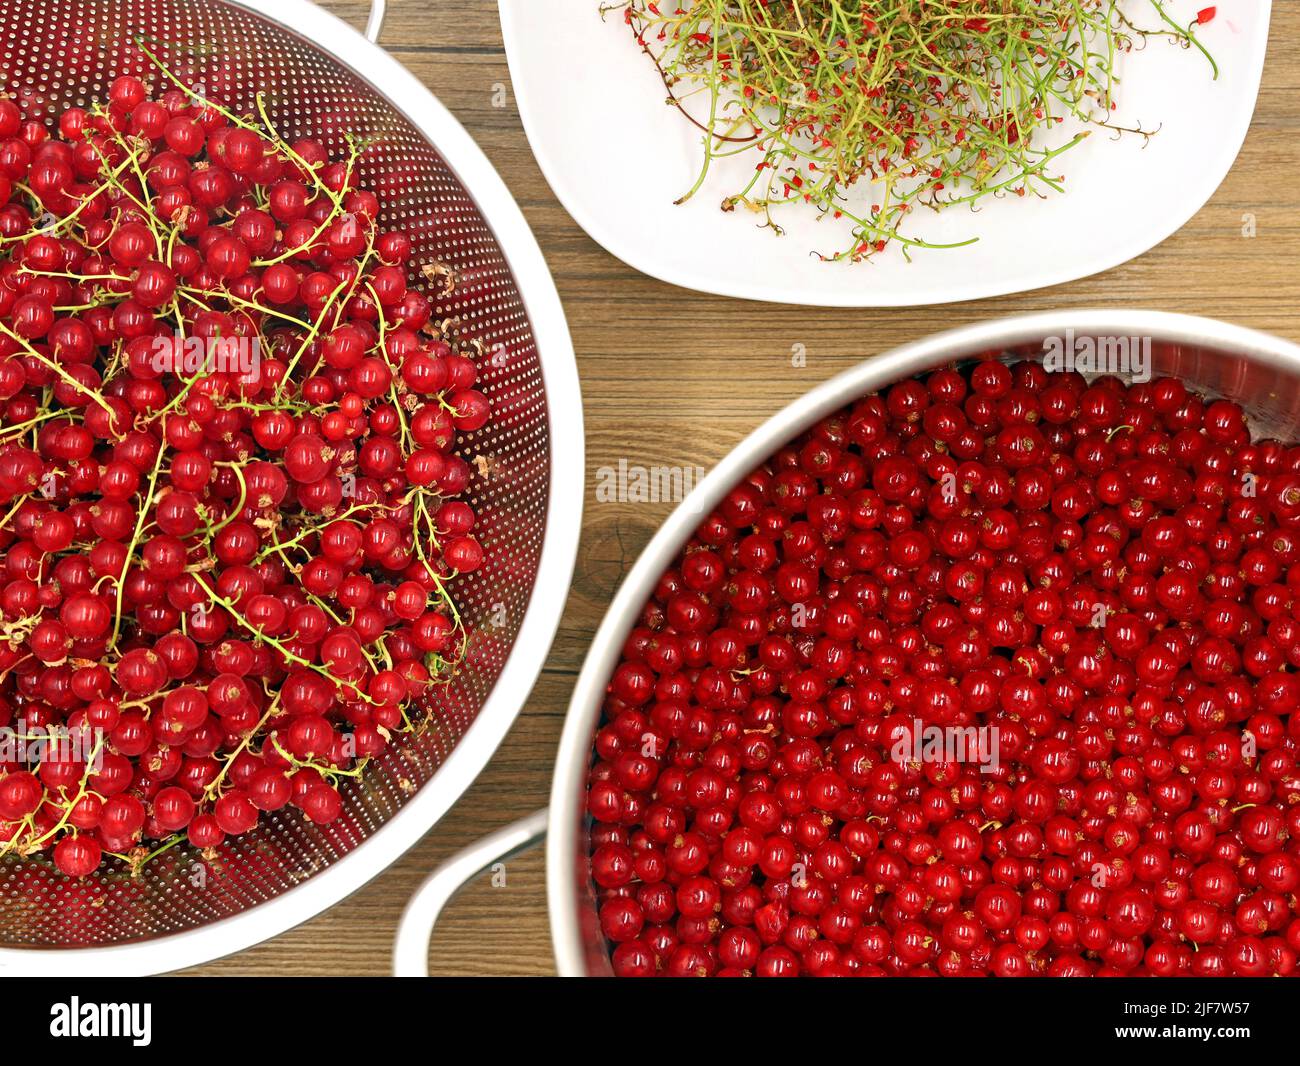 top view of cleaned red currant berries in a saucepan for making fruit juice or jam, removing the stalk of the berries Stock Photo